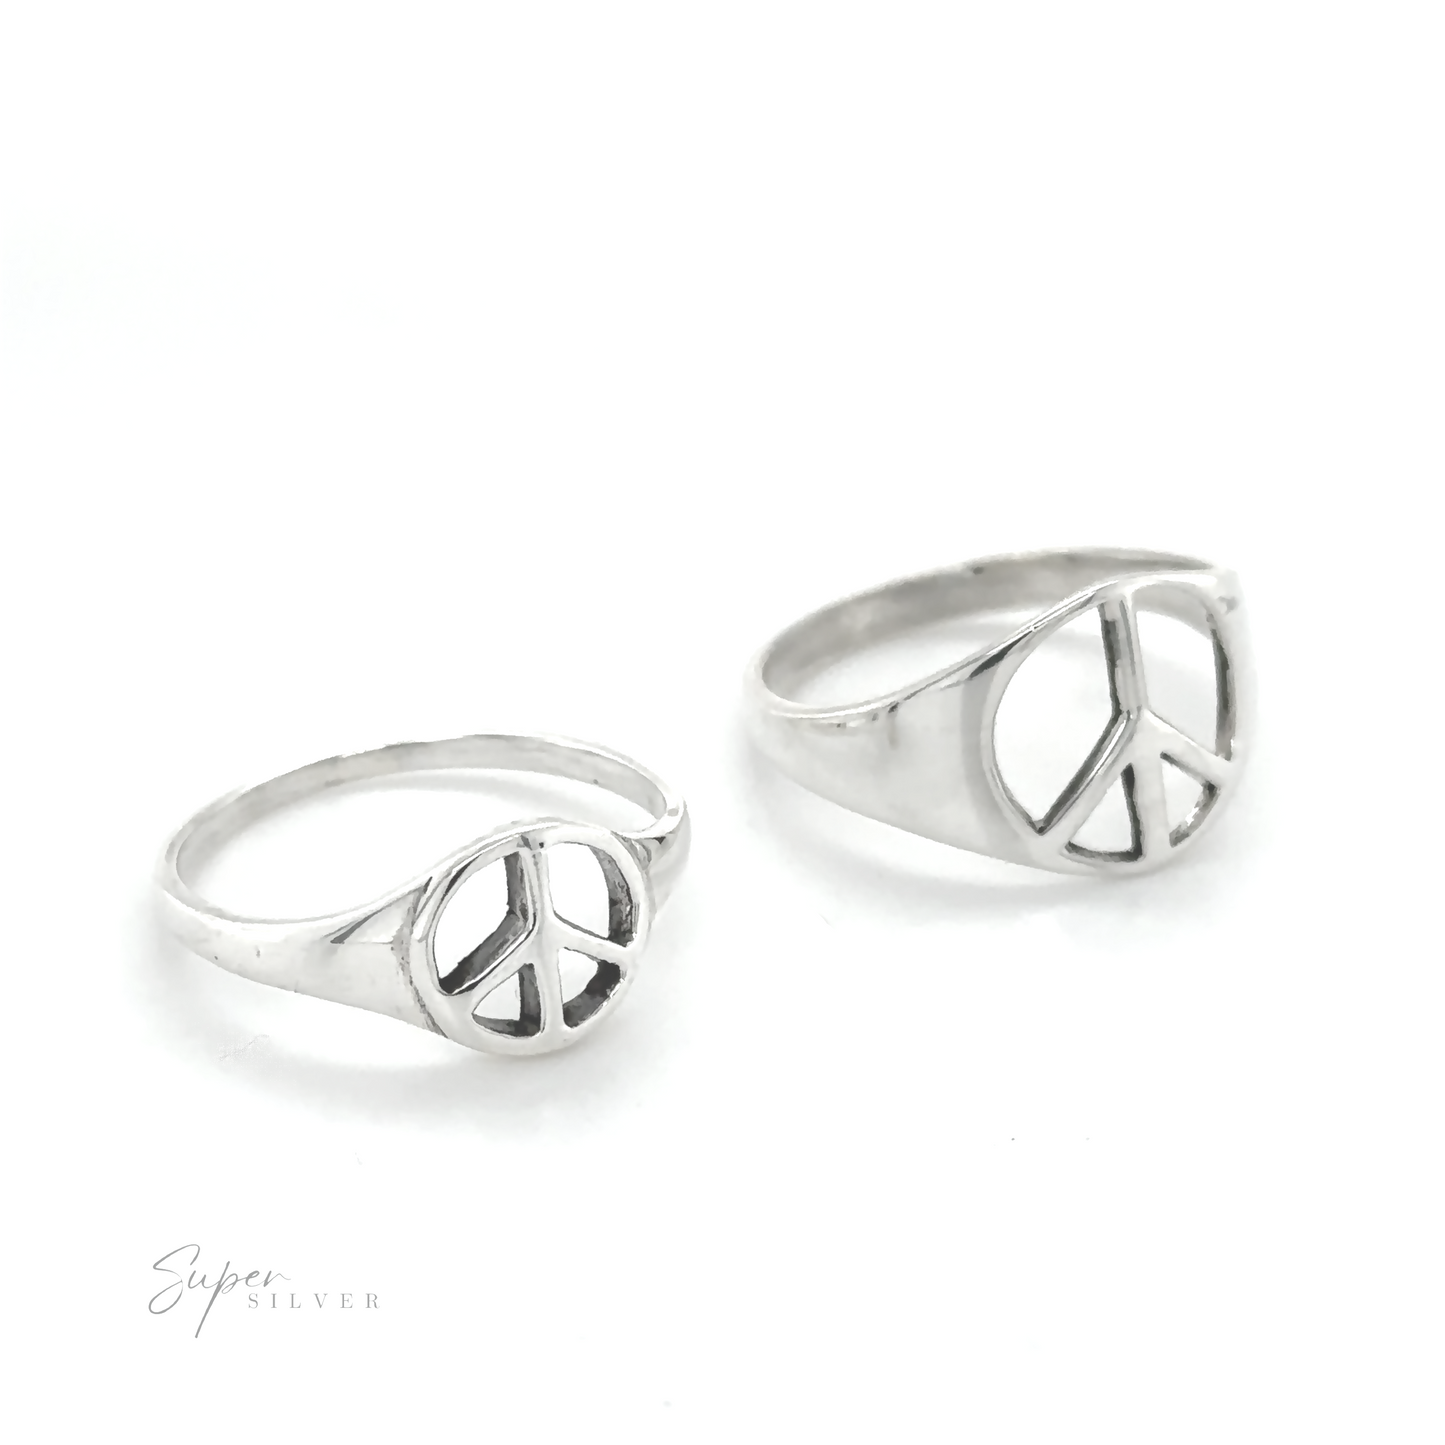 Classic-style tapered peace rings featuring a peace sign symbol, promoting unity and harmony.